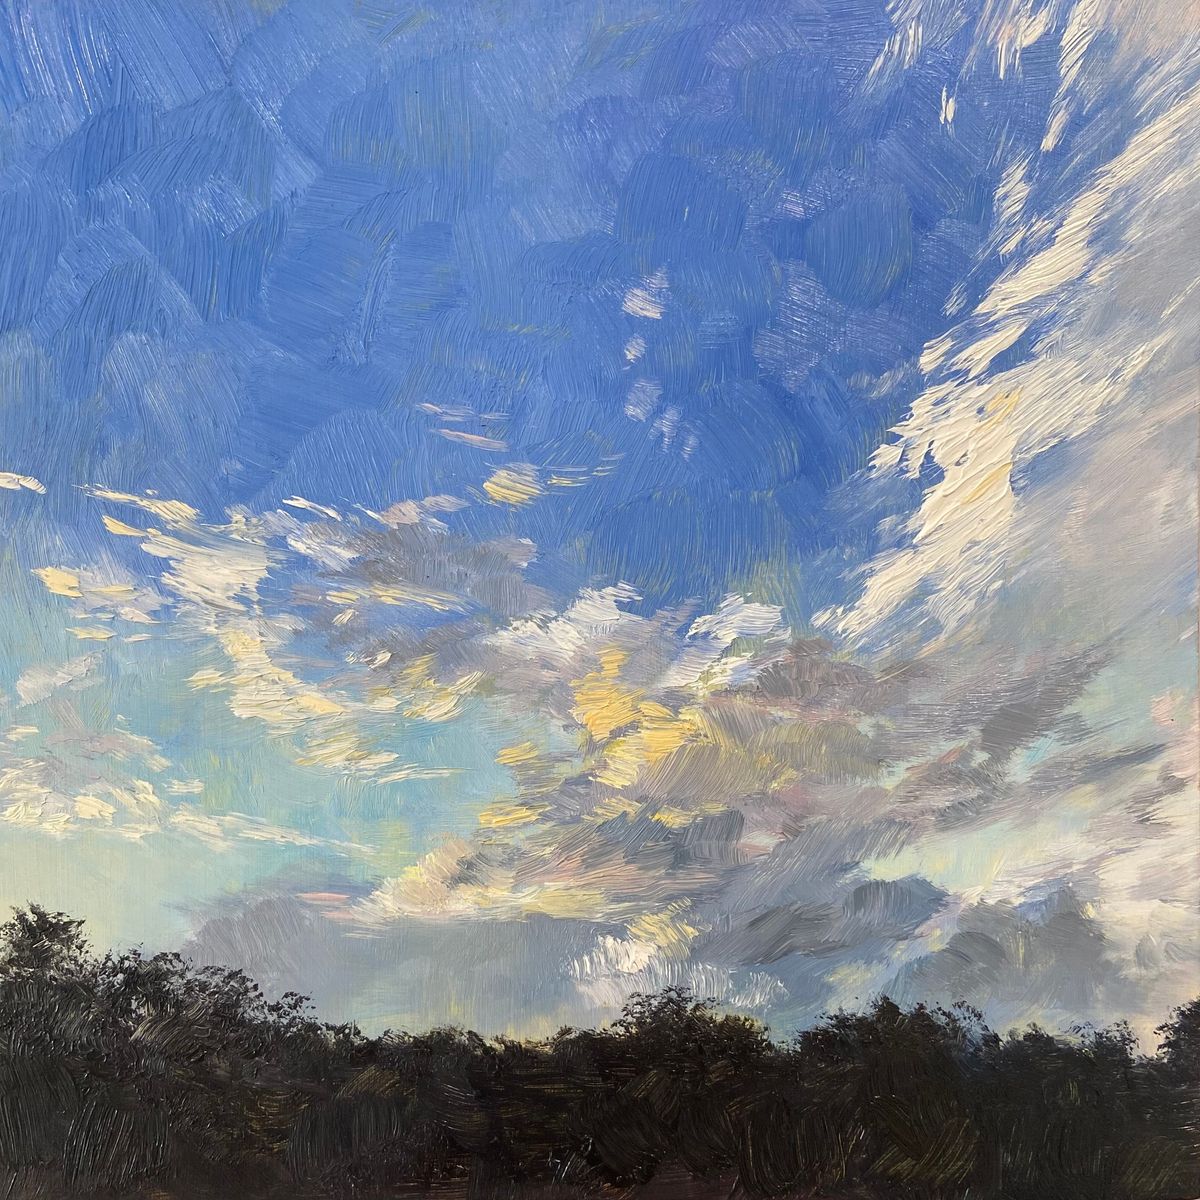 Painting Workshop - Painting the Sky and Atmospheric Cloudscapes